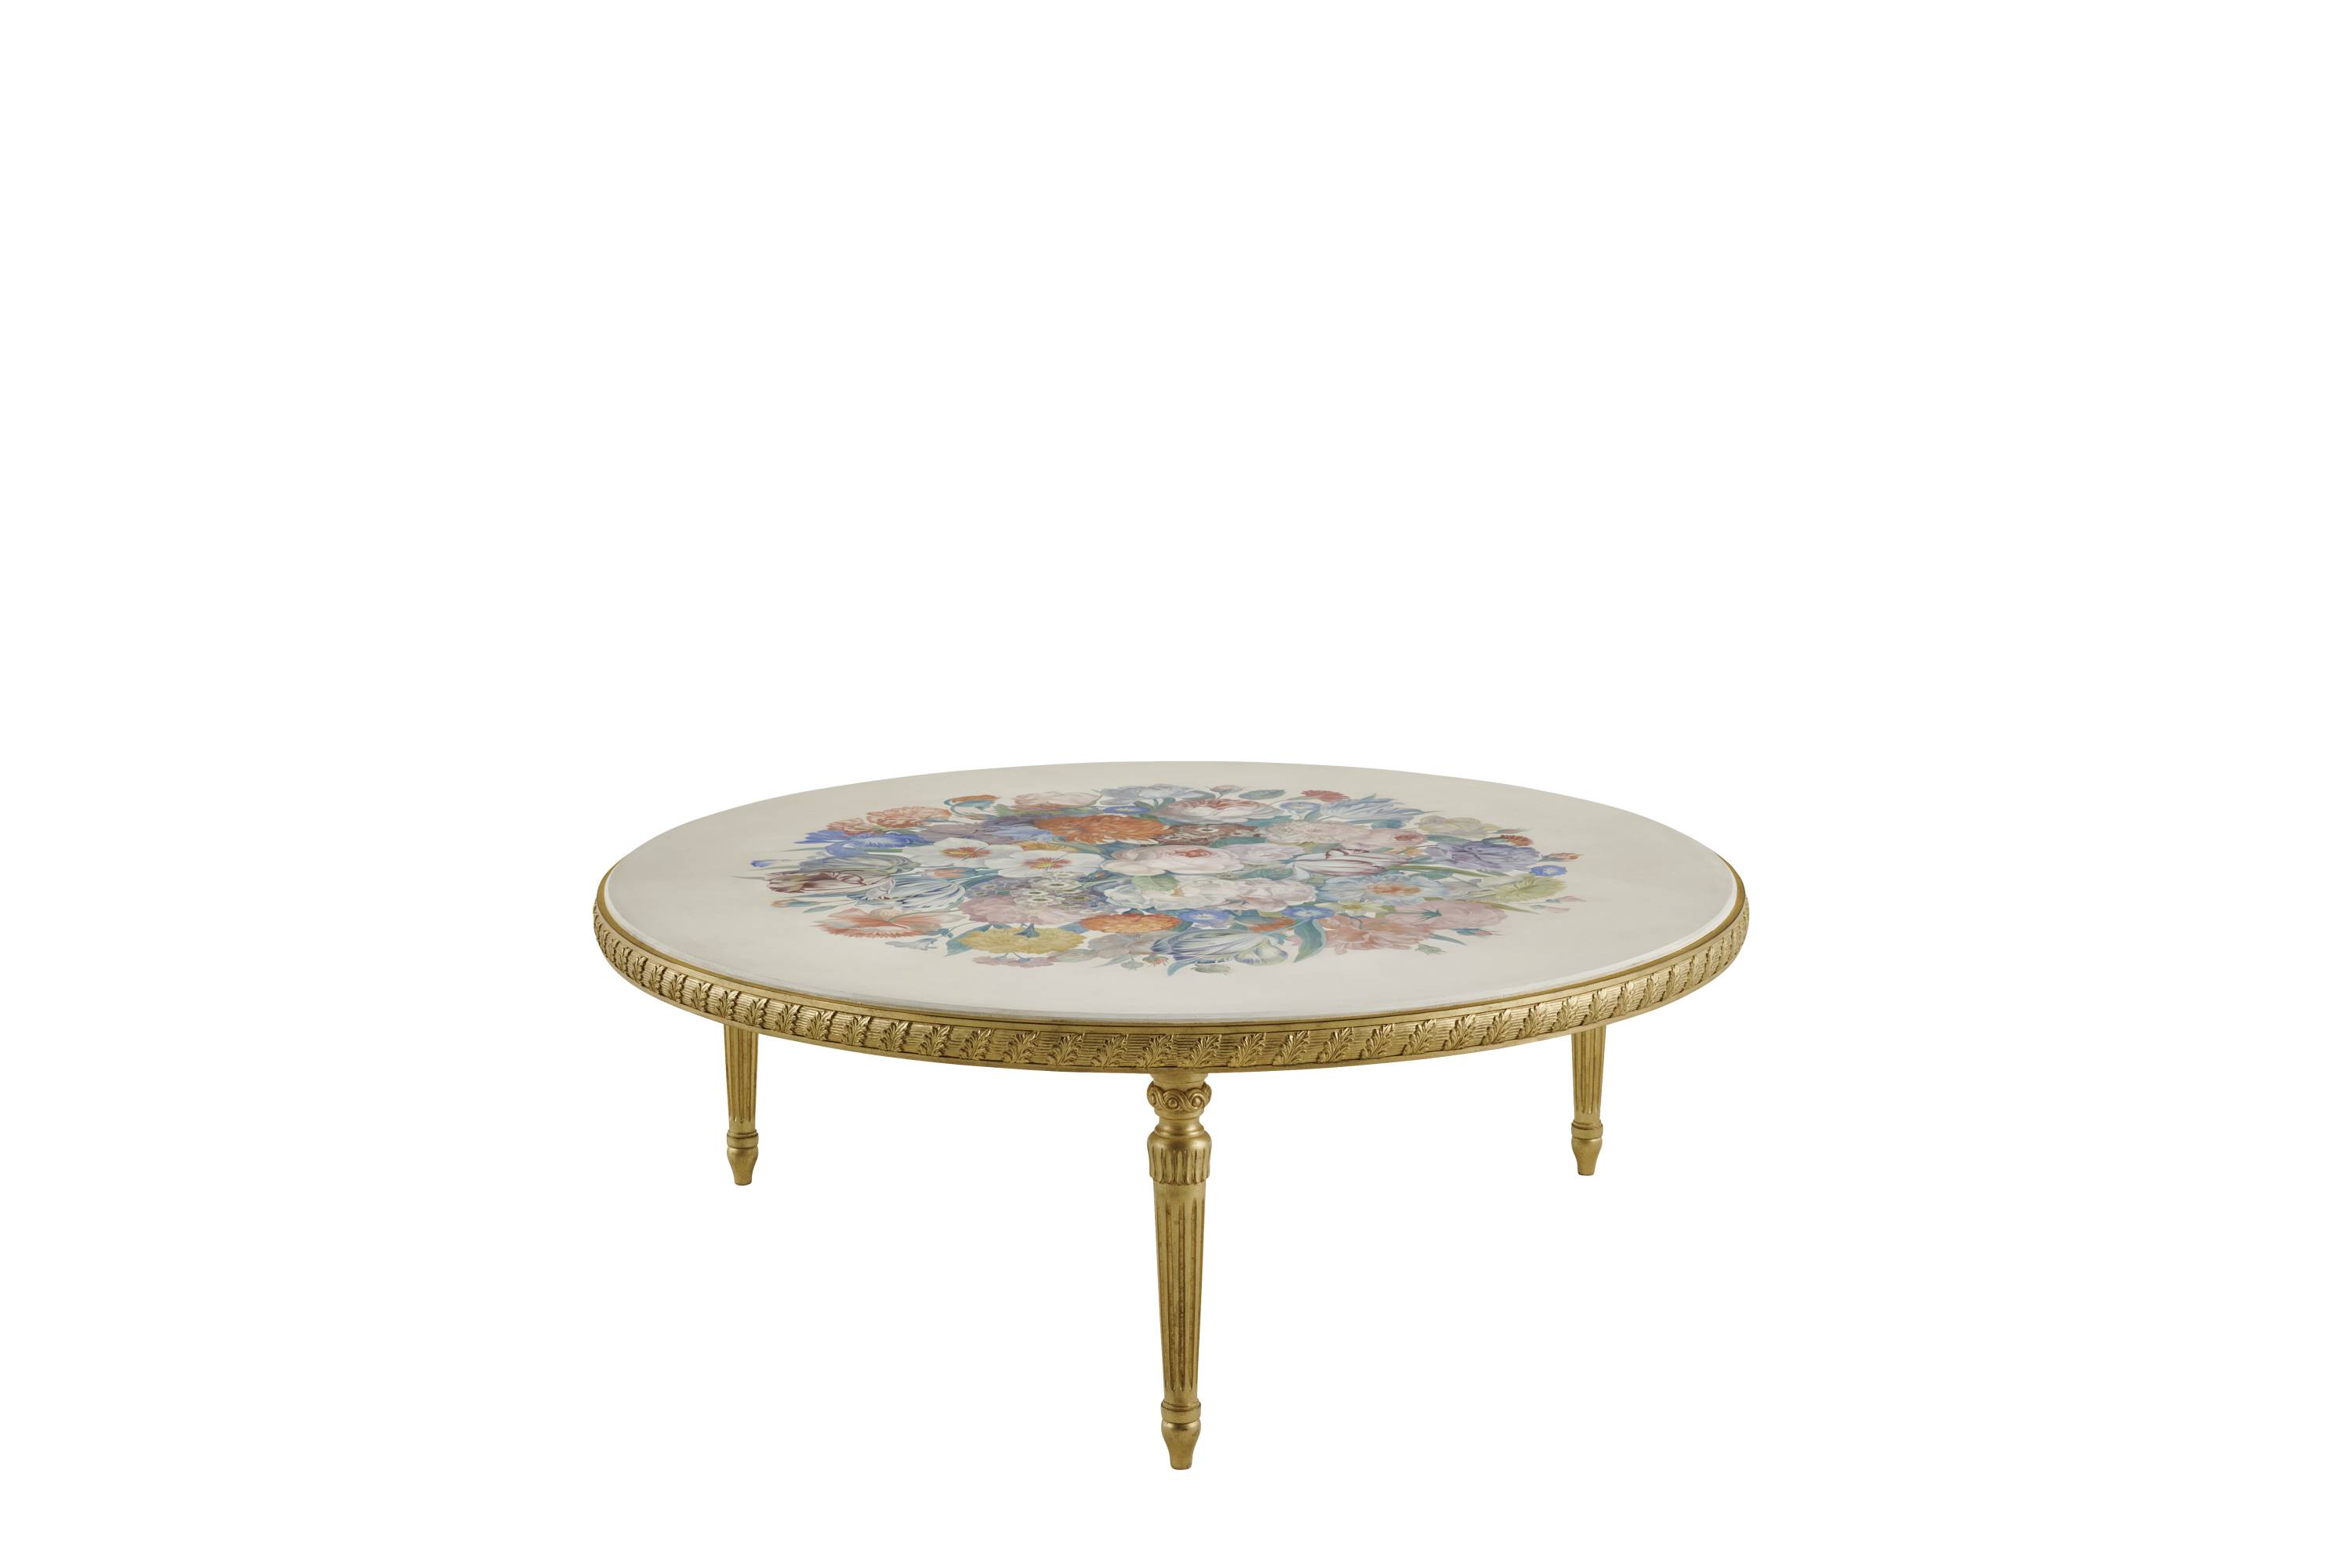 FLEUR-DE-LIS low table - convey elegance to each space with Italian classic low tables of the classic Héritage collection